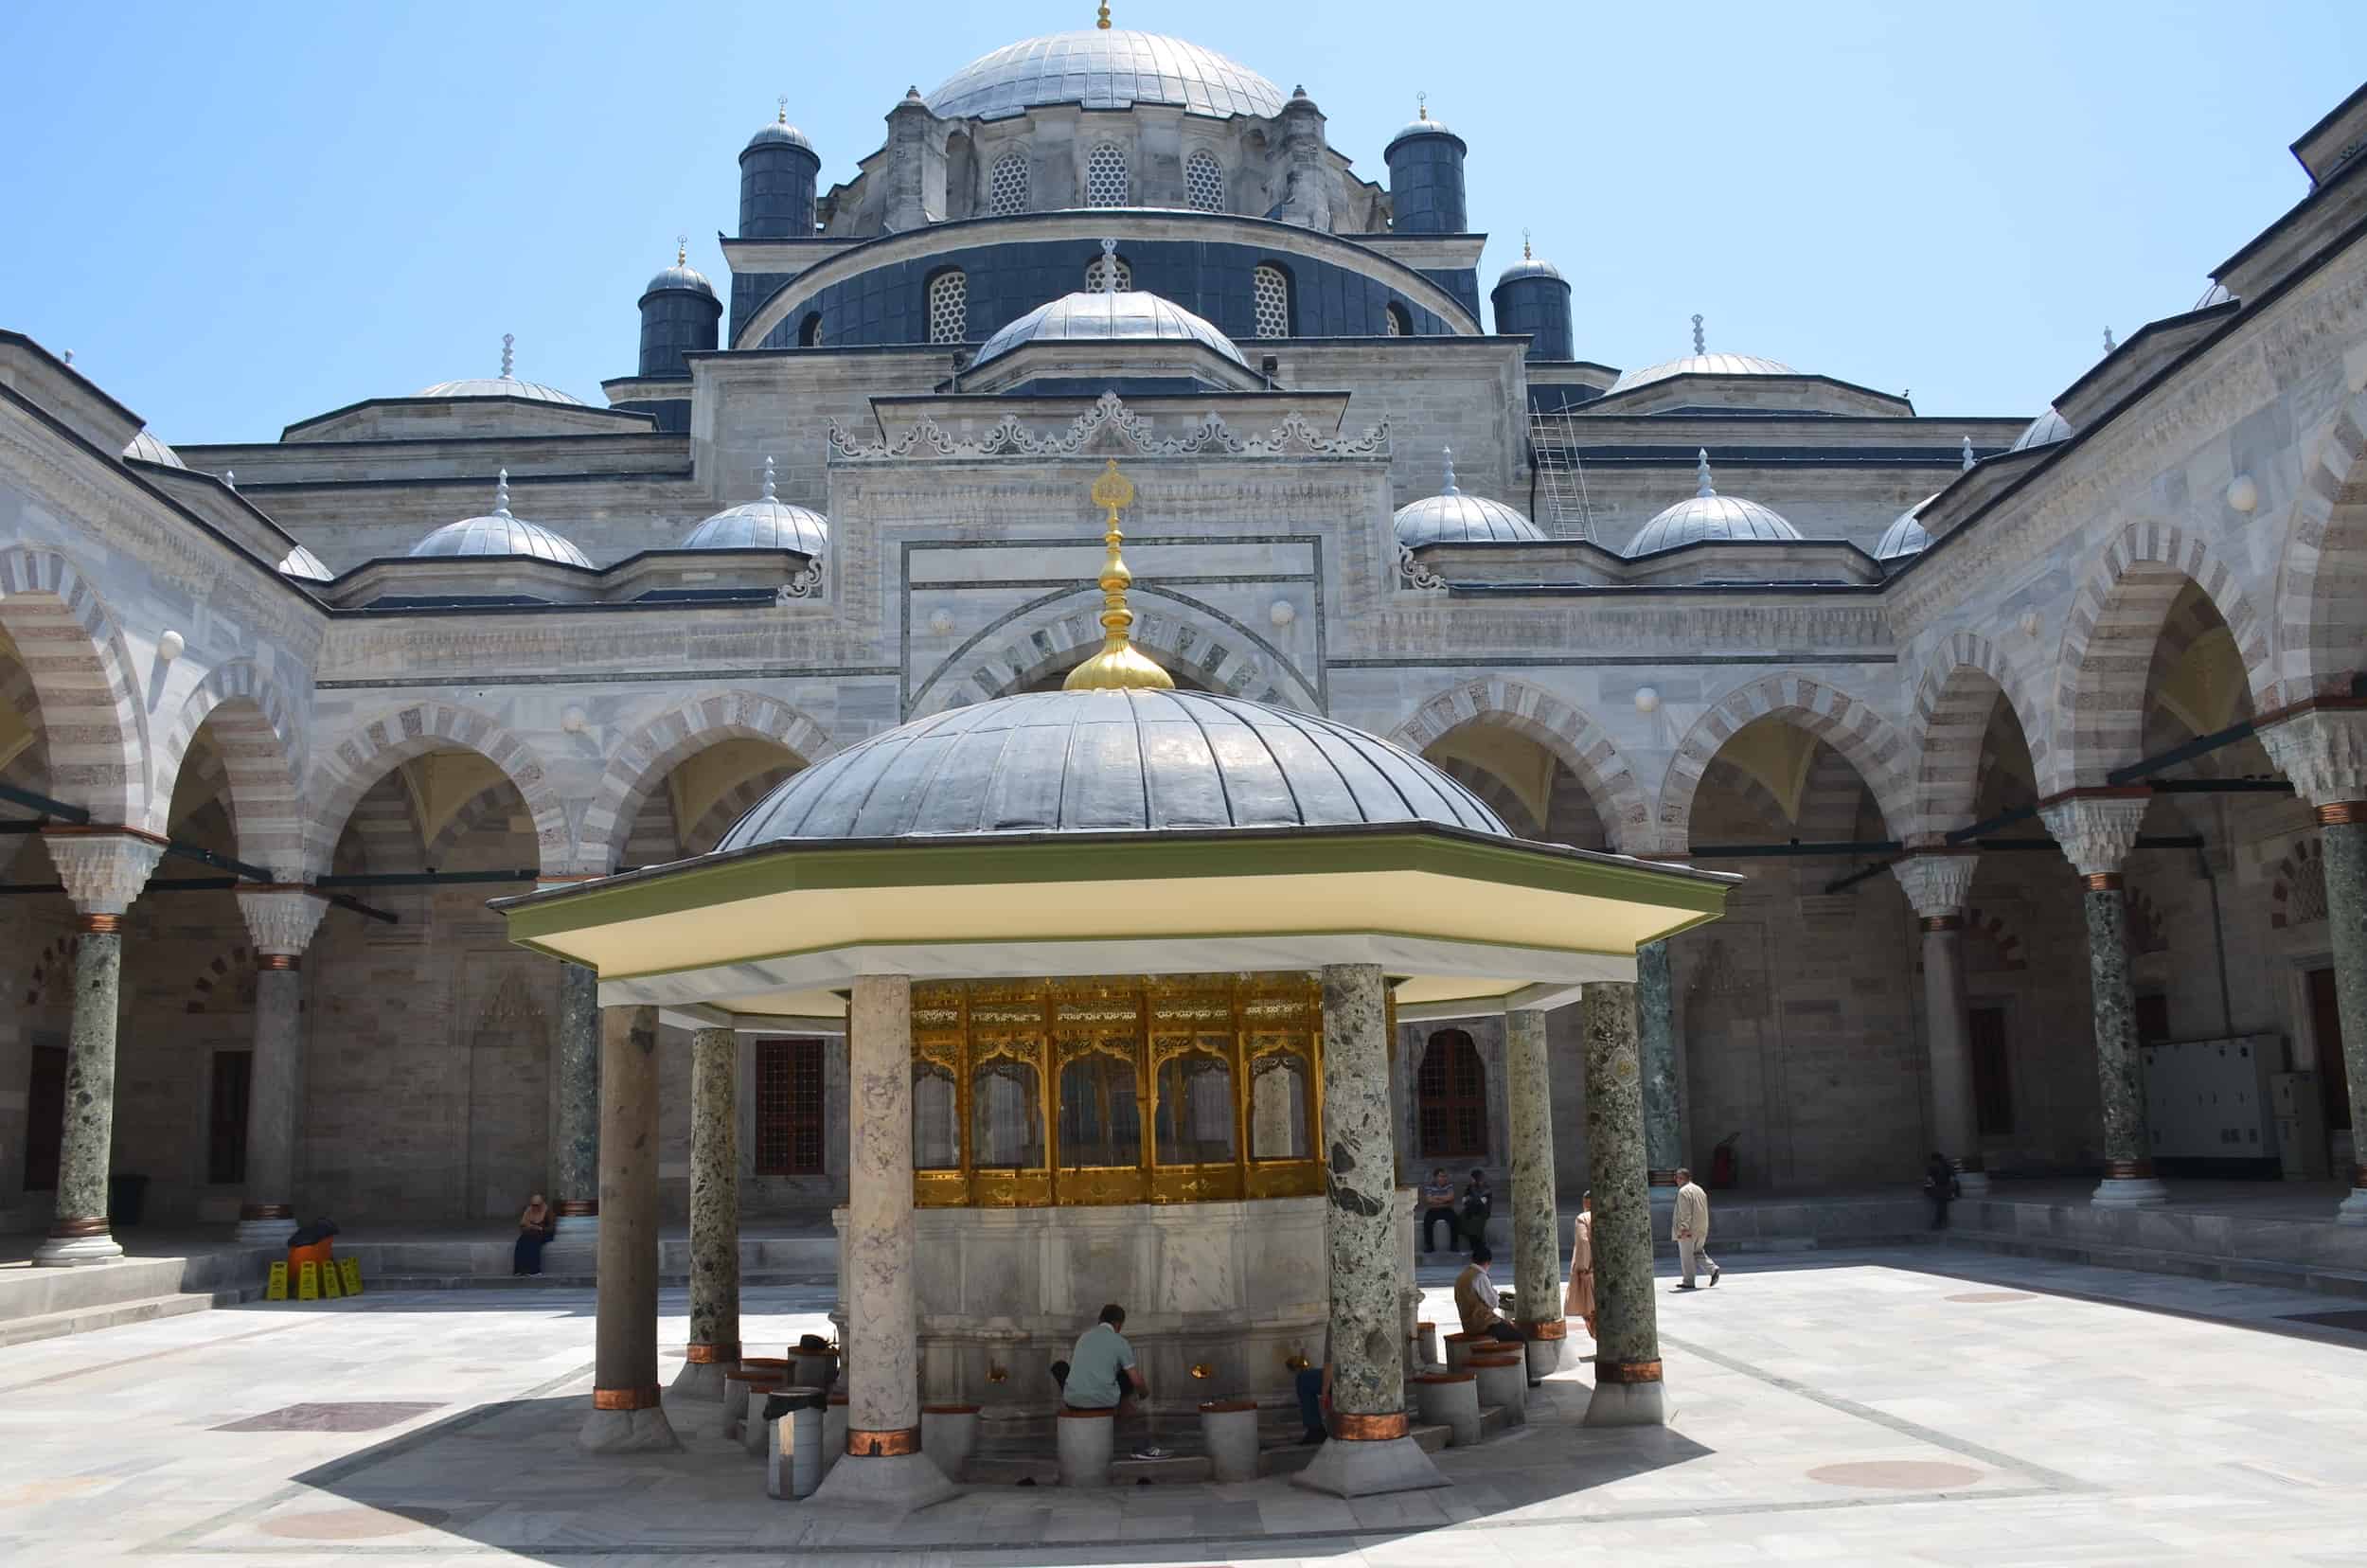 Courtyard of the Bayezid II Mosque in Istanbul, Turkey